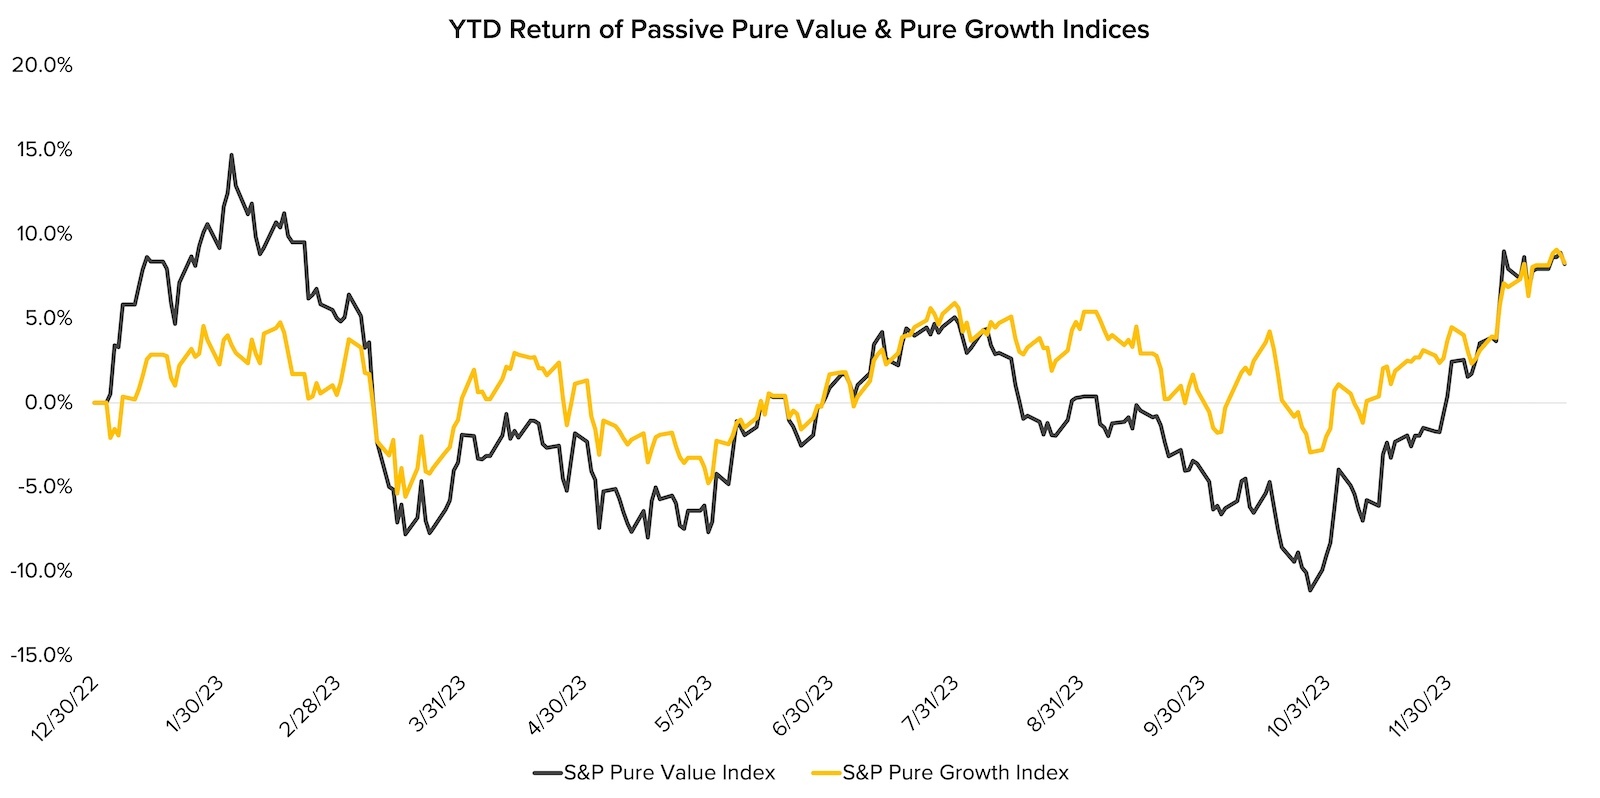 YTD Return of Passive Pure Value & Pure Growth Indices